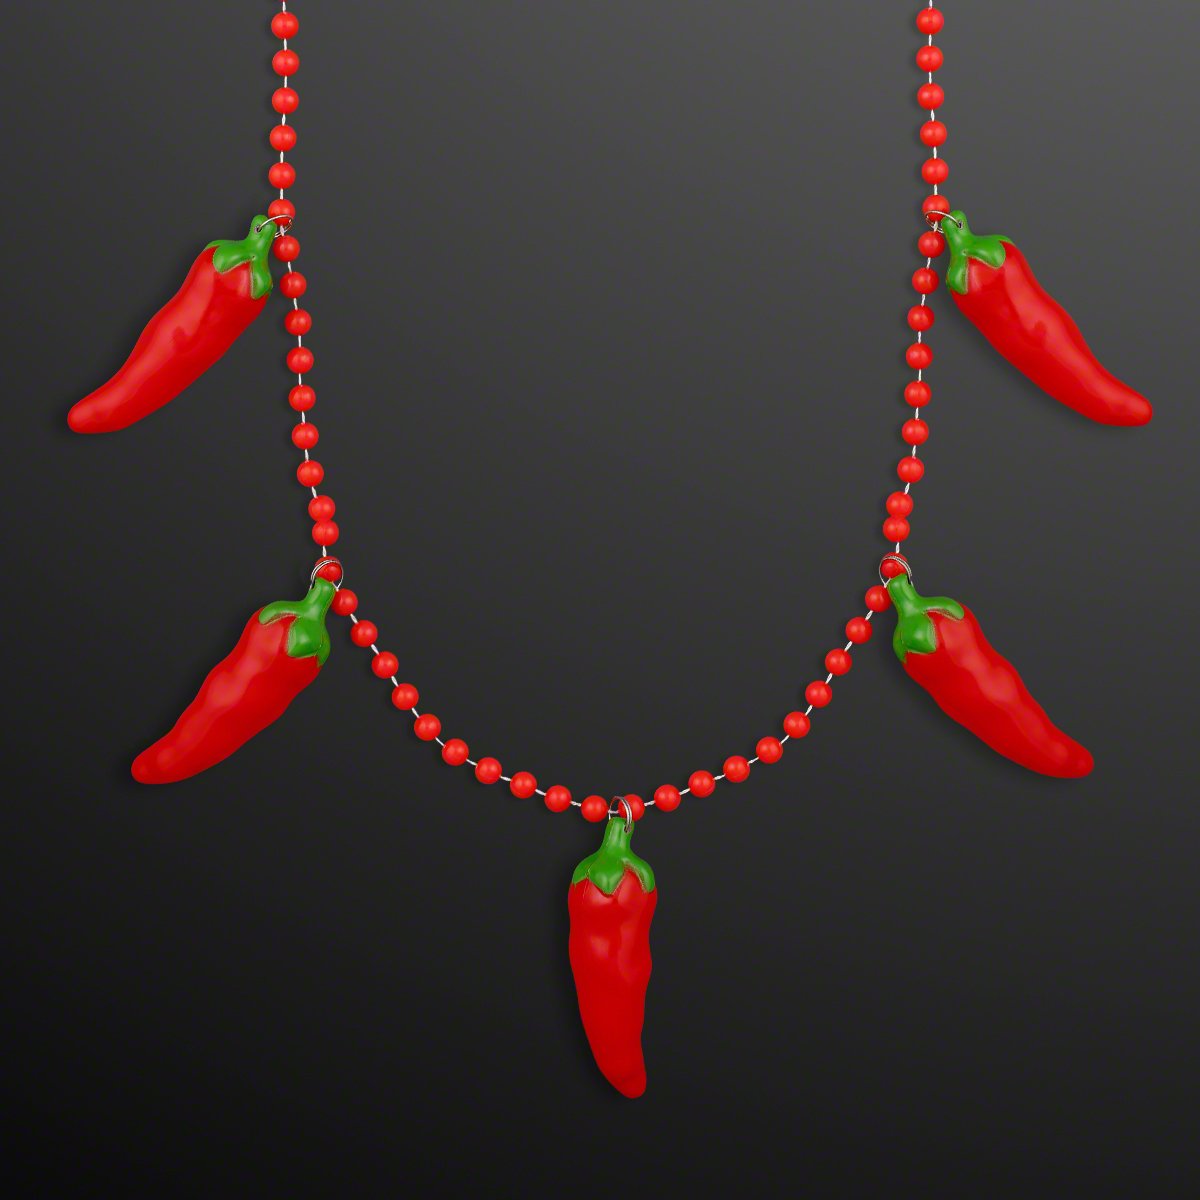 Man displaying NON-Light Up Chili Pepper Charm Necklace